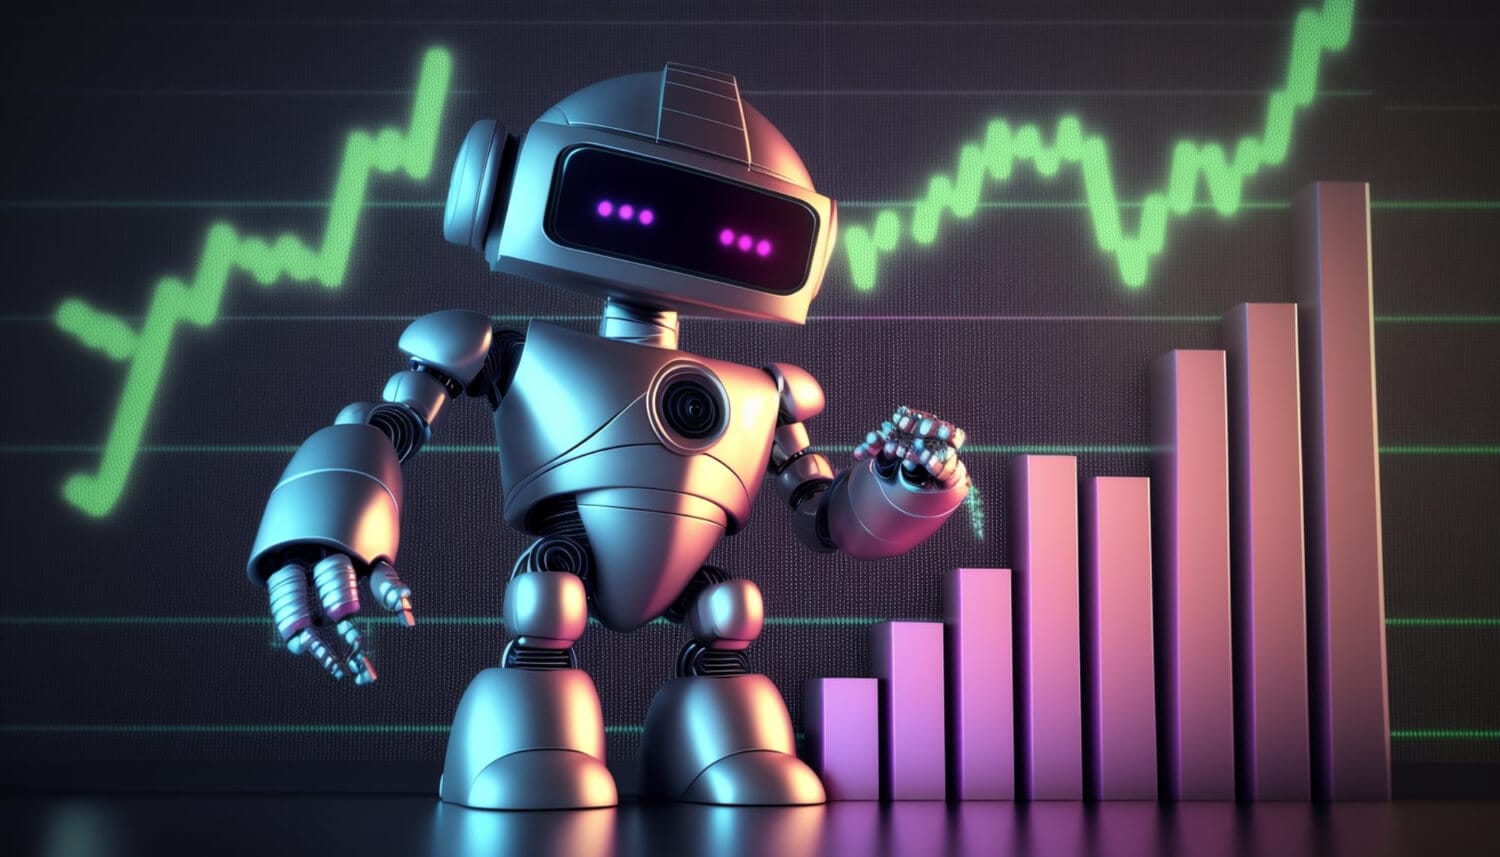 robot with graph showing stock chart background (1)